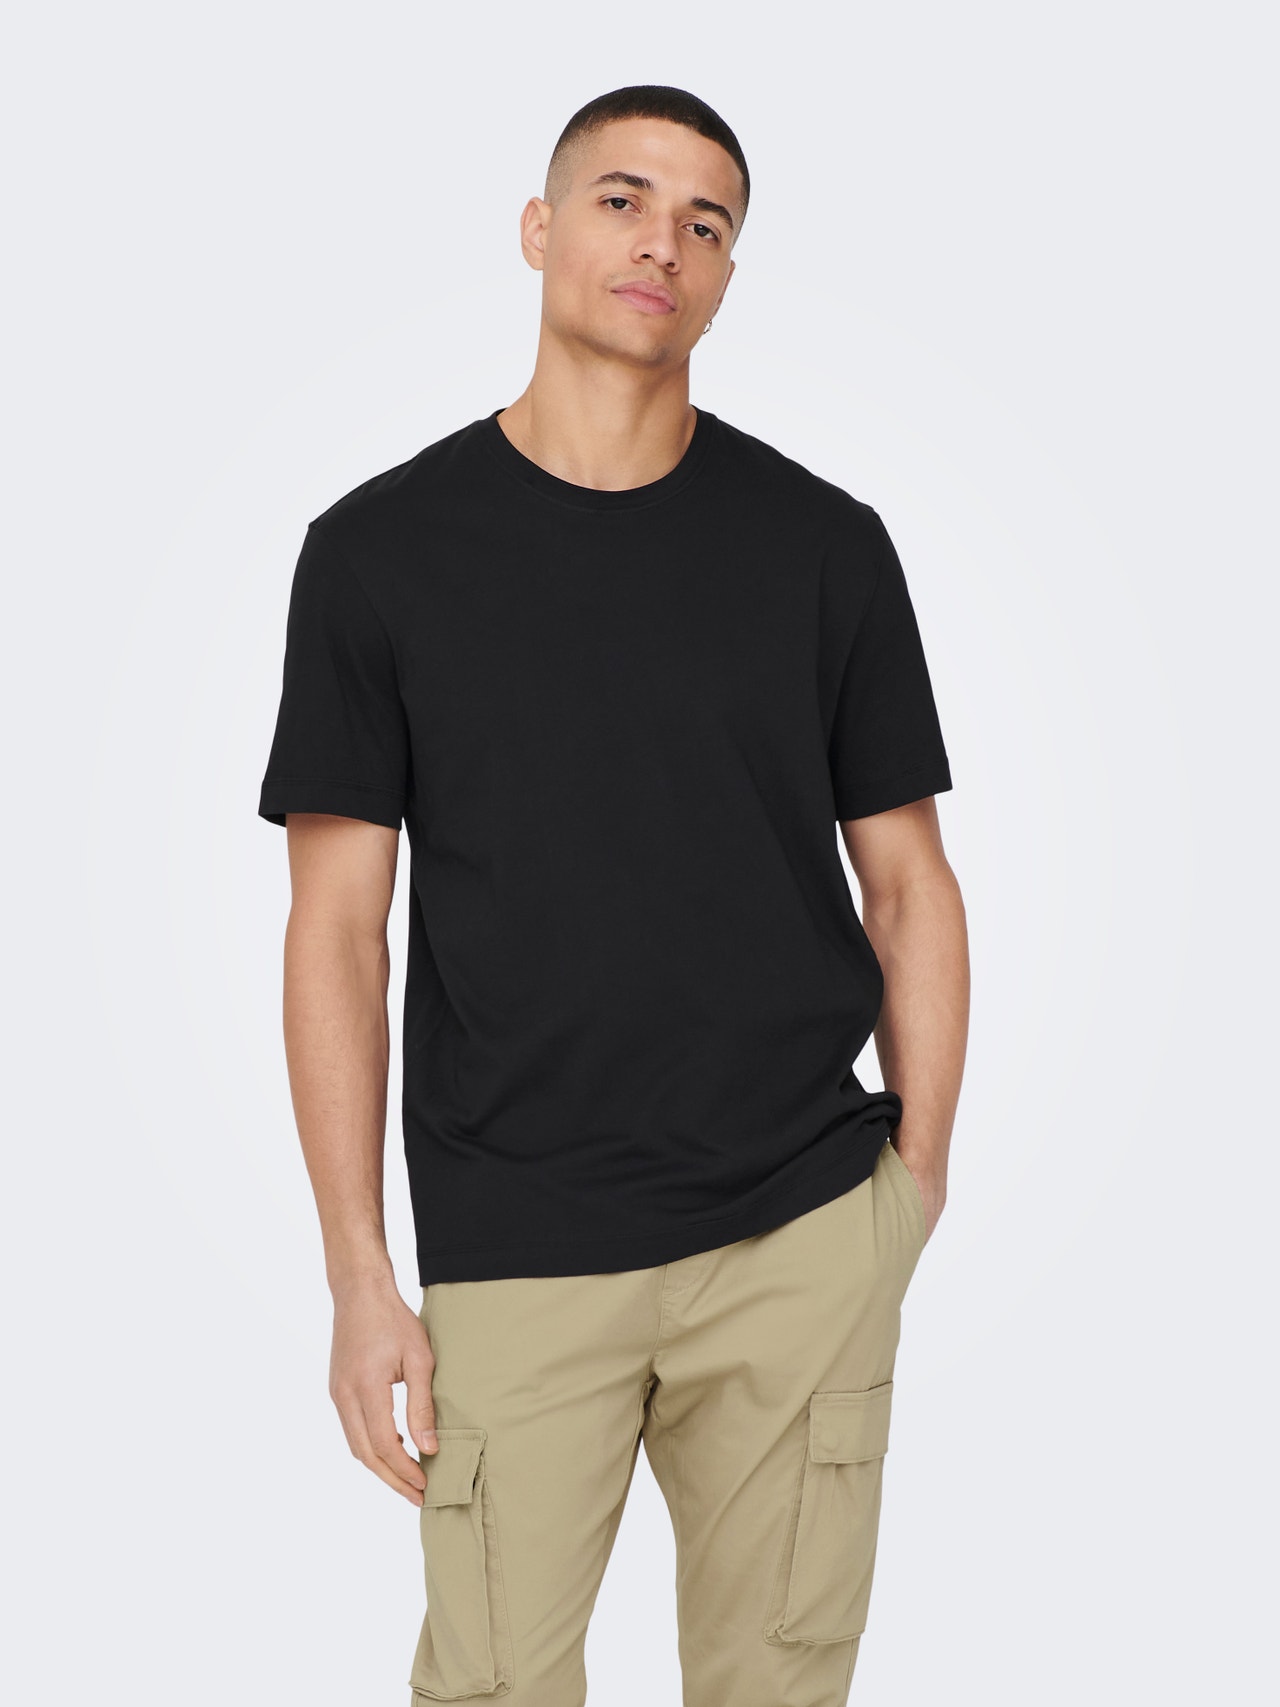 ONLY & SONS O-neck t-shirt -Black - 22025208